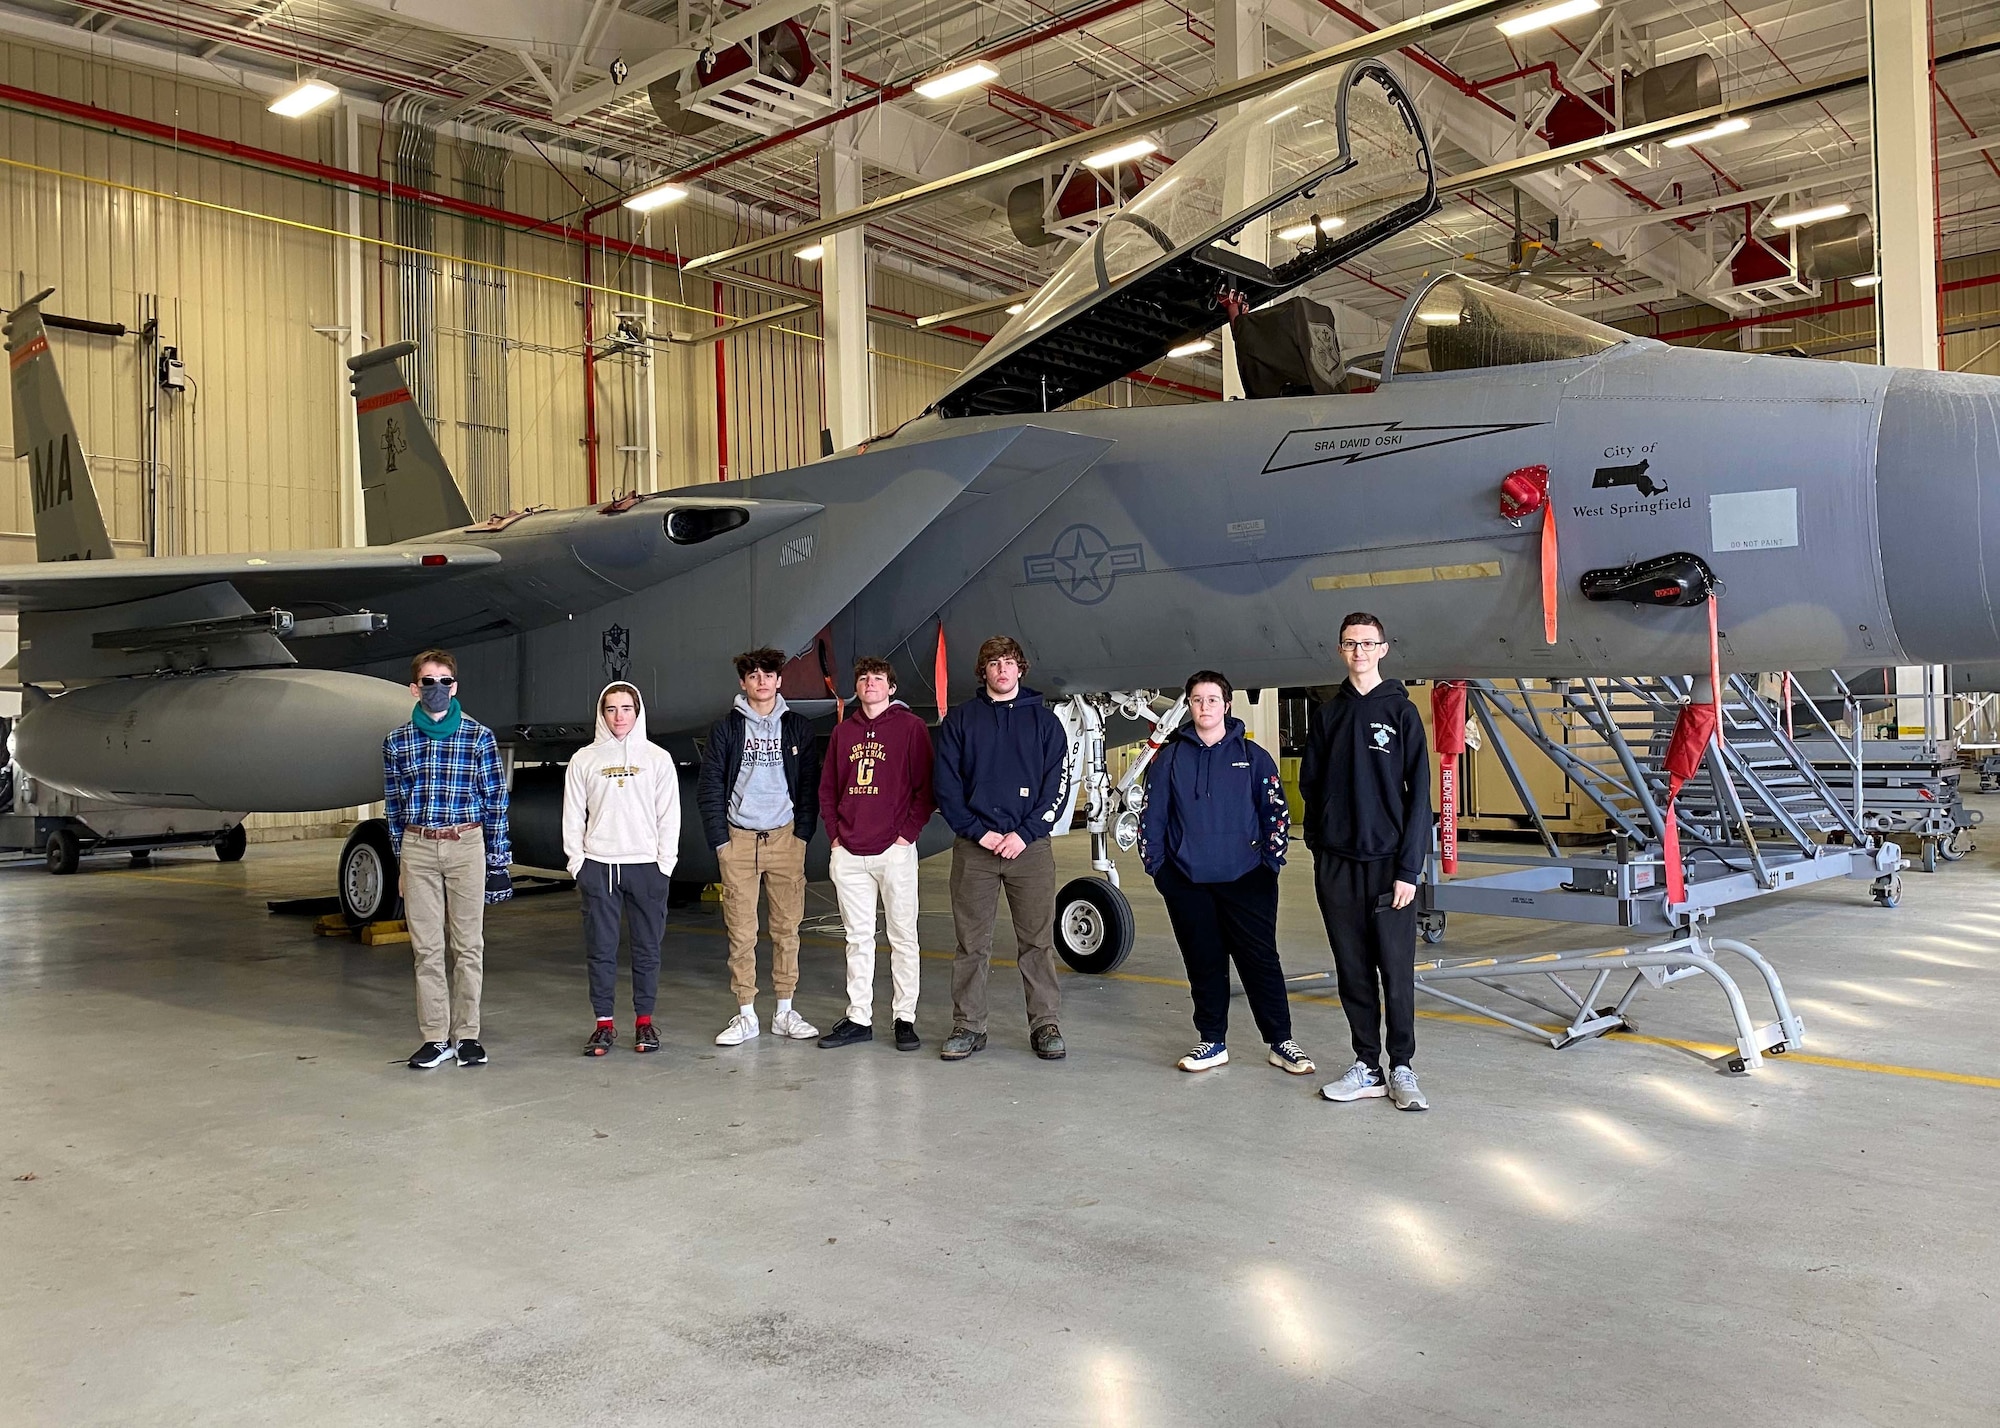 The 104th Fighter Wing hosts students from Granby Memorial High School showing interest in joing the National Guard. Students pose for a photo in front of a static F-15. Students were told about the importance in the maintenance of the F-15s. (U.S. Air National Guard courtesy photo)